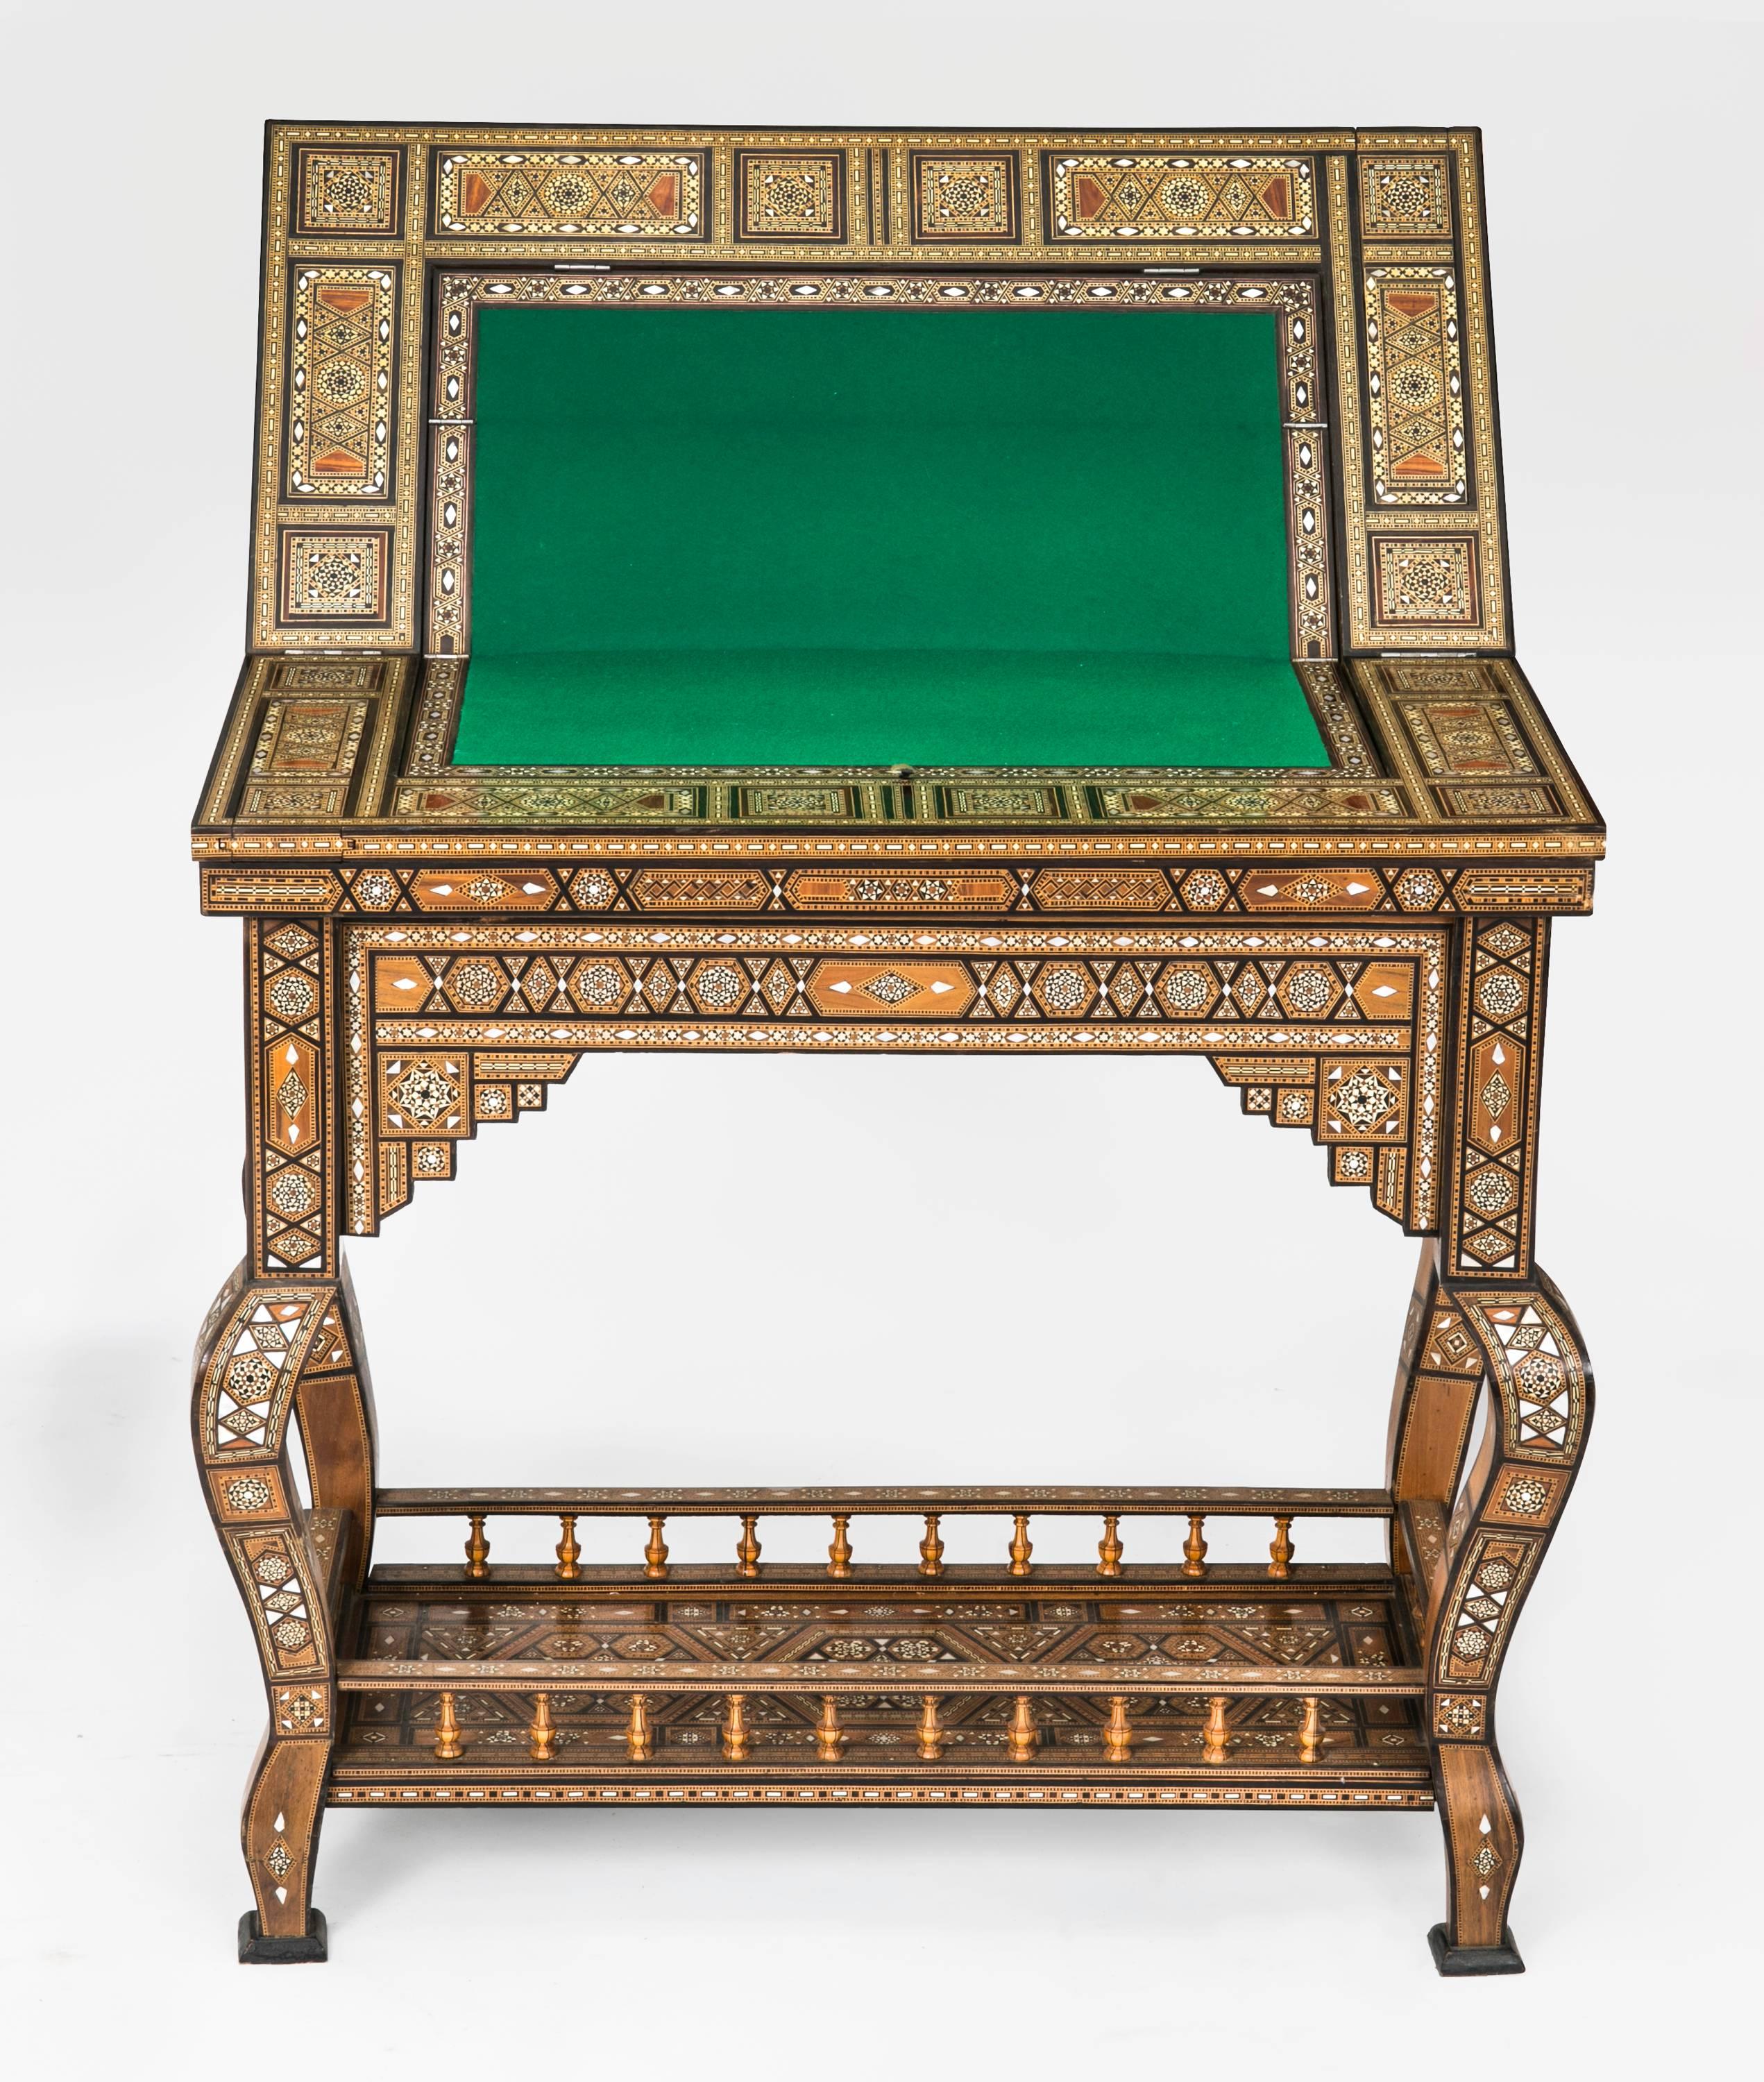 Early 1930s Syrian game table. Amazingly intricate and beautifully executed inlay work in various wood specimens, mother-of-Pearl  and bone. 
Tabletop folds open to newly covered felt for card game, folds open again to backgammon and chess board,